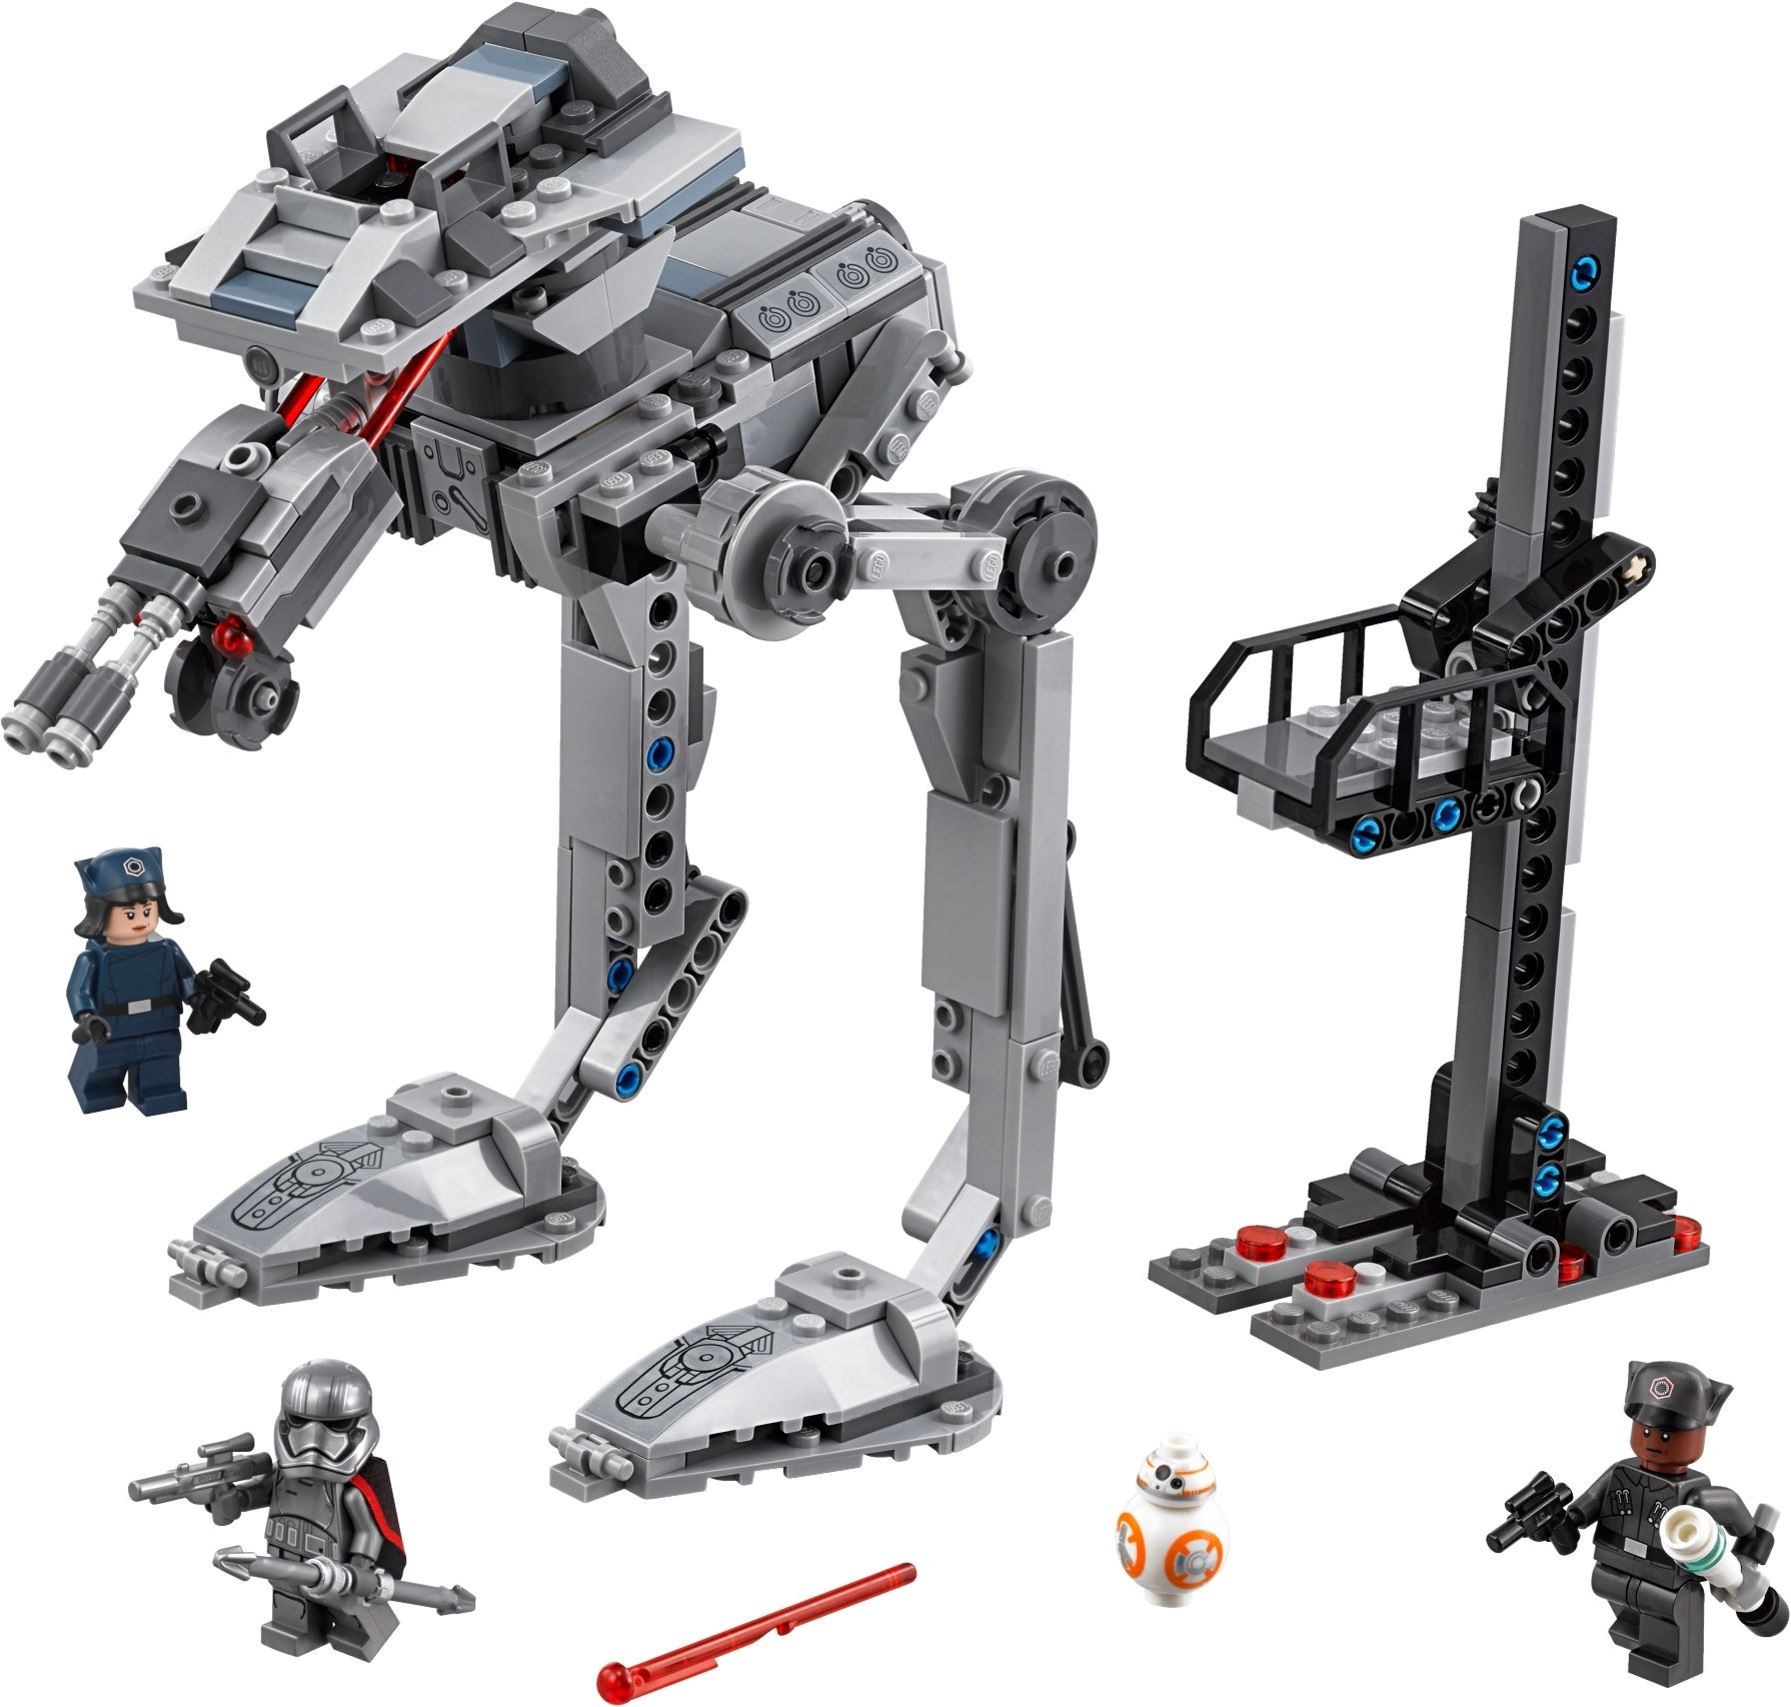 Star Wars: The Last Jedi LEGO sets, constraction figures, and Microfighters  revealed [News] - The Brothers Brick